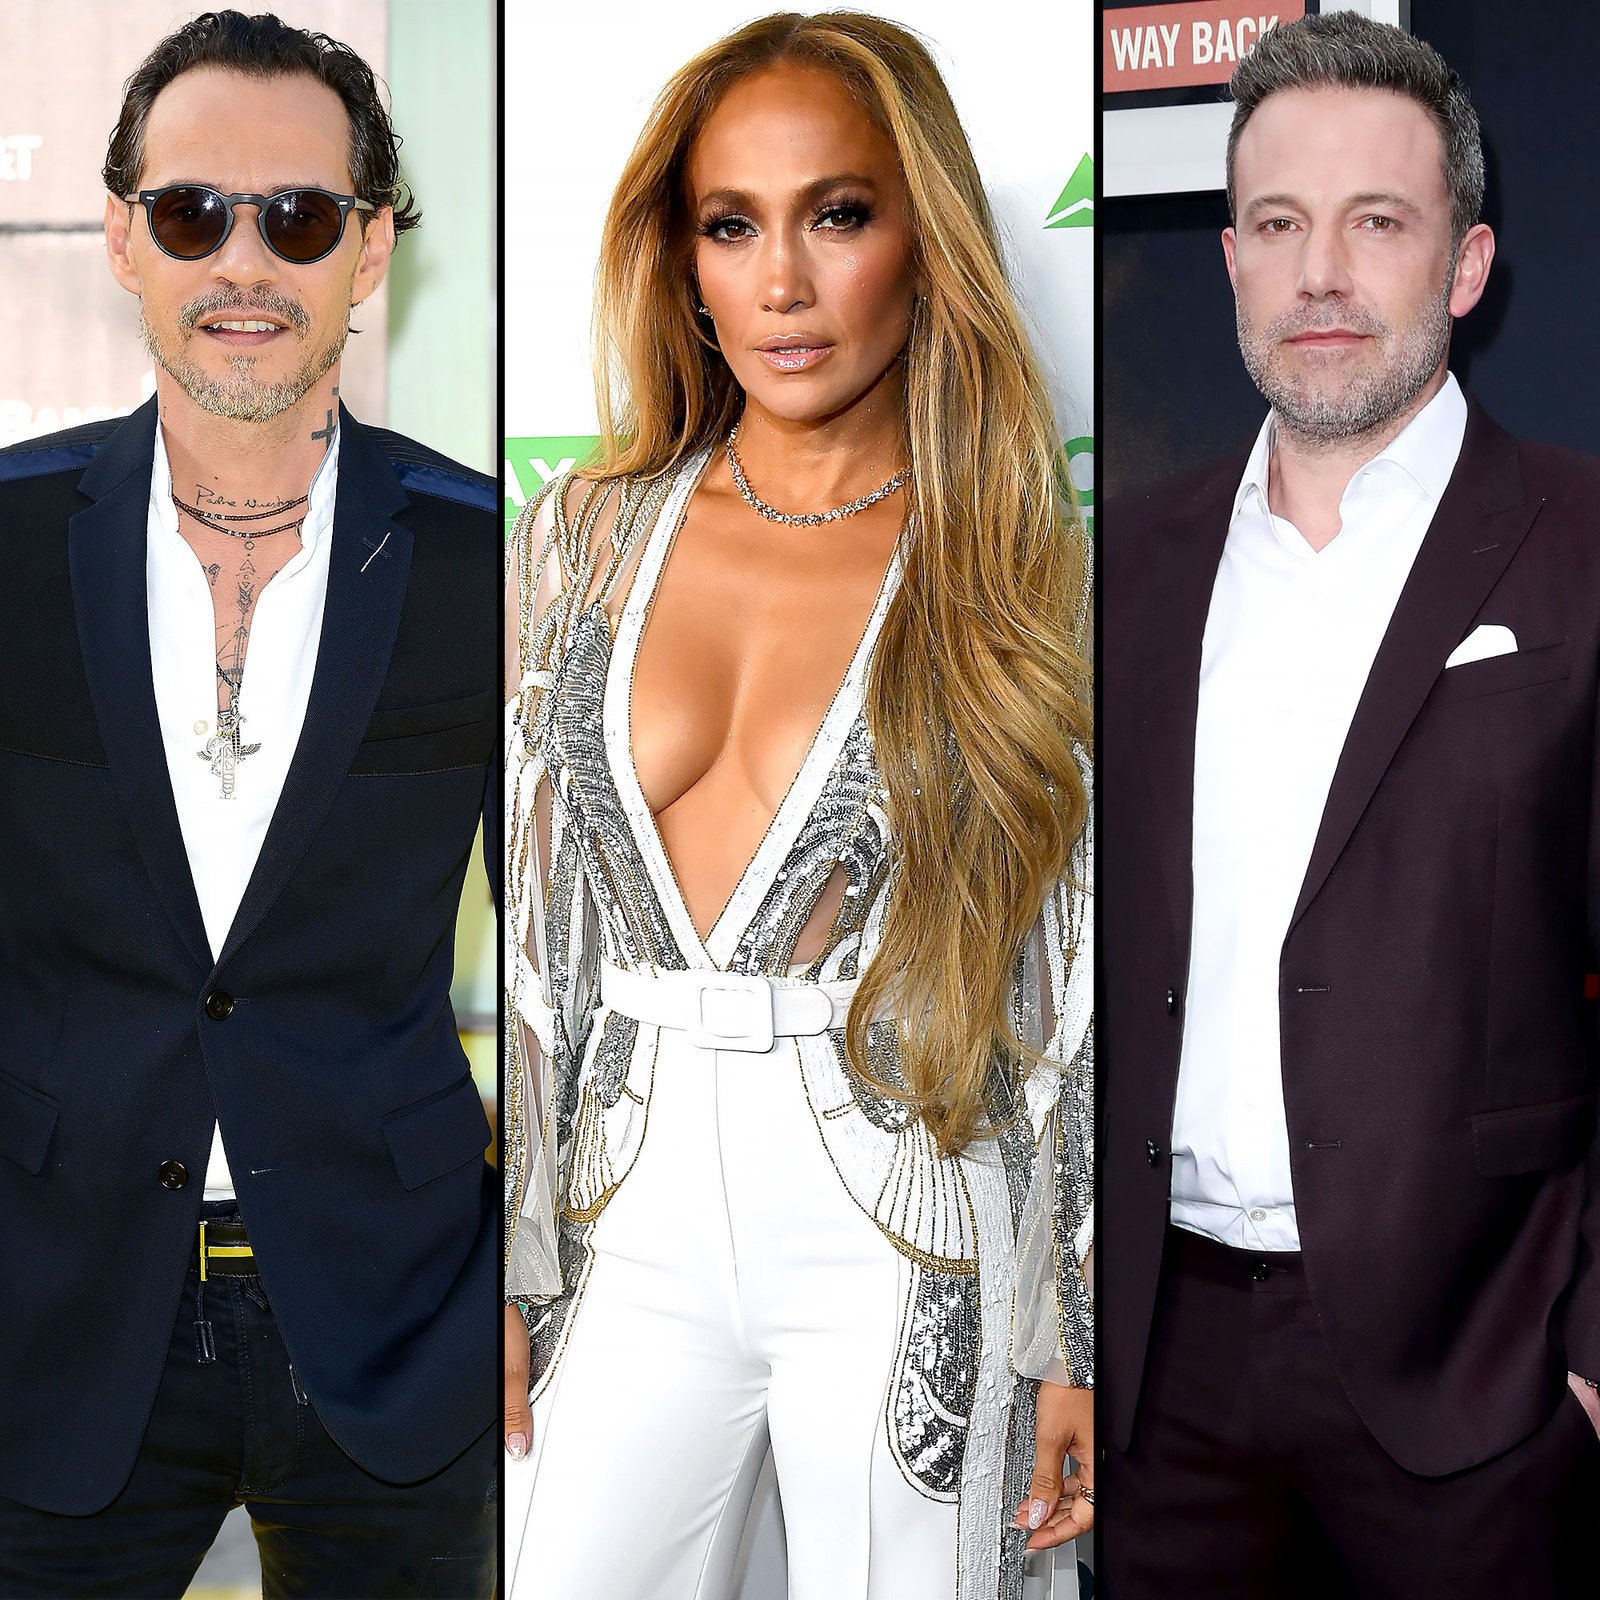 Marc Anthony outraged by JLO: "Our children have not yet recovered from Alex's departure, and Mom already has a new boyfriend"